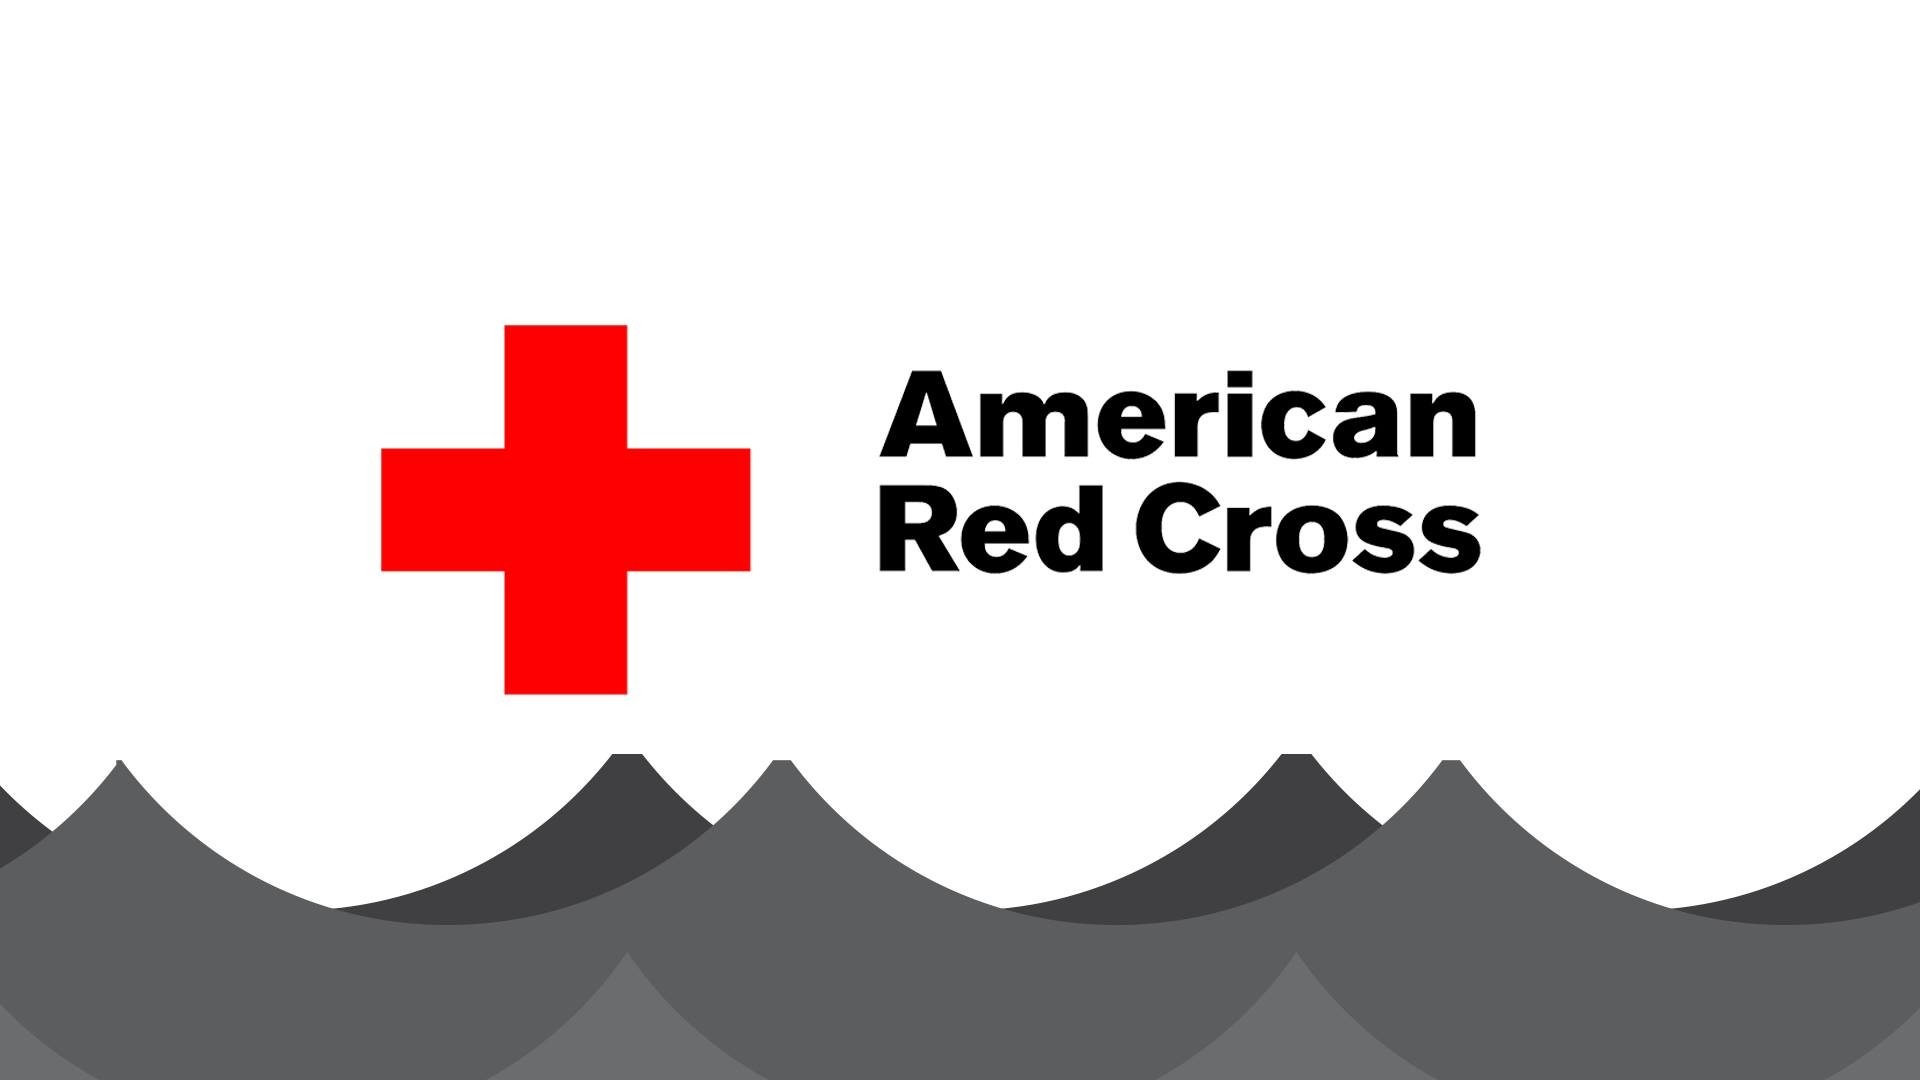 Red Cross Wallpaper Posted By Christopher Mercado